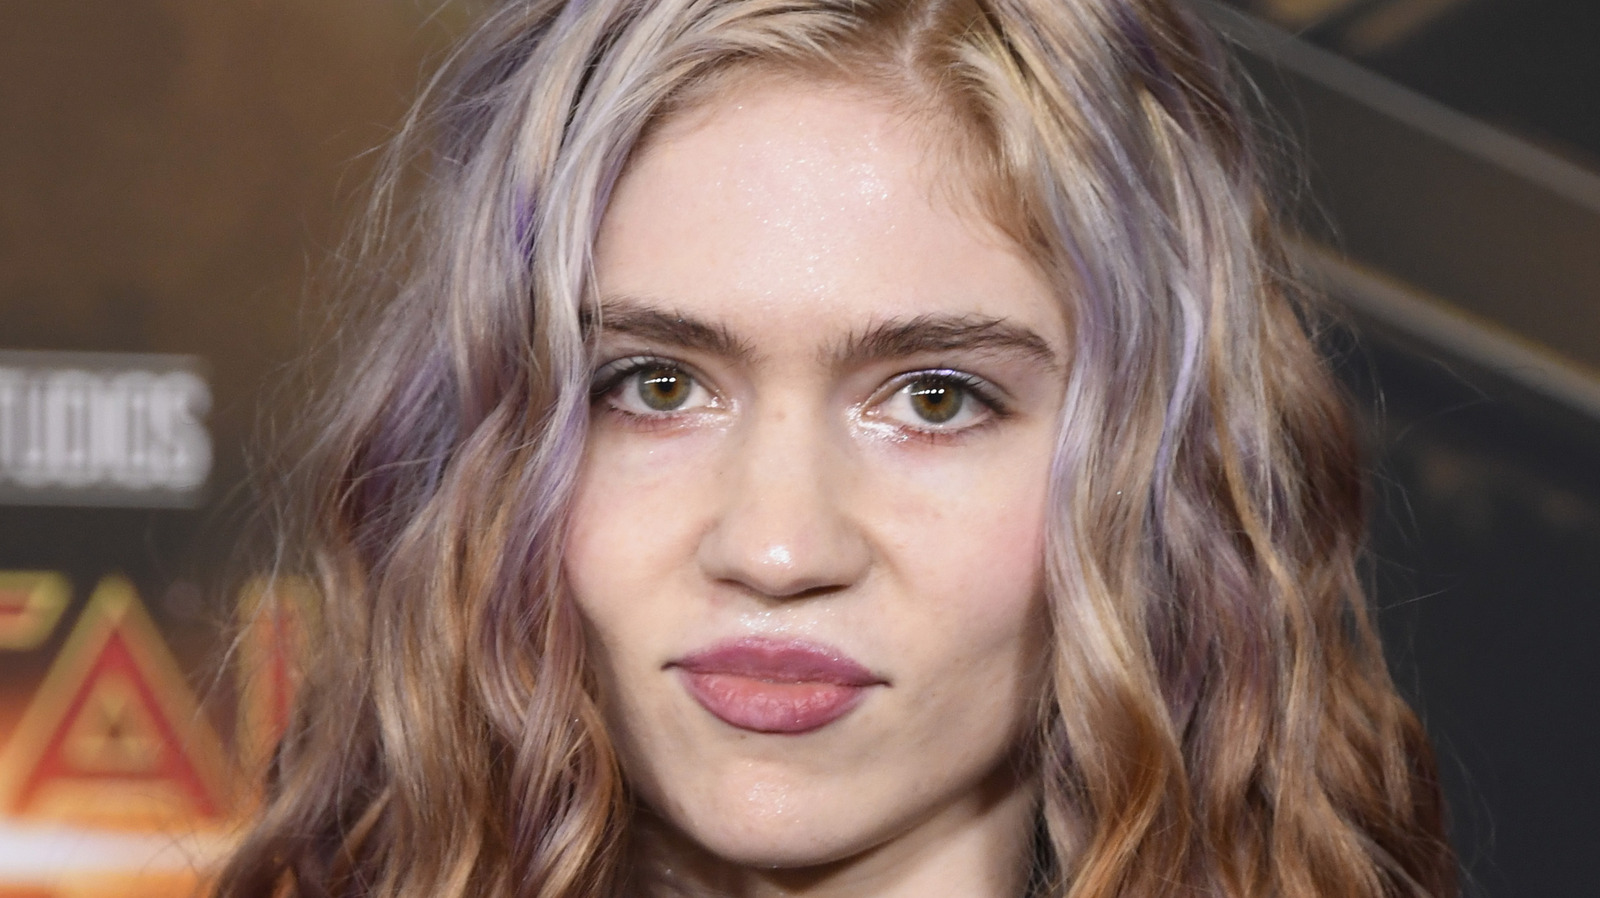 Grimes and Elon Musk Share Some Unexpected News